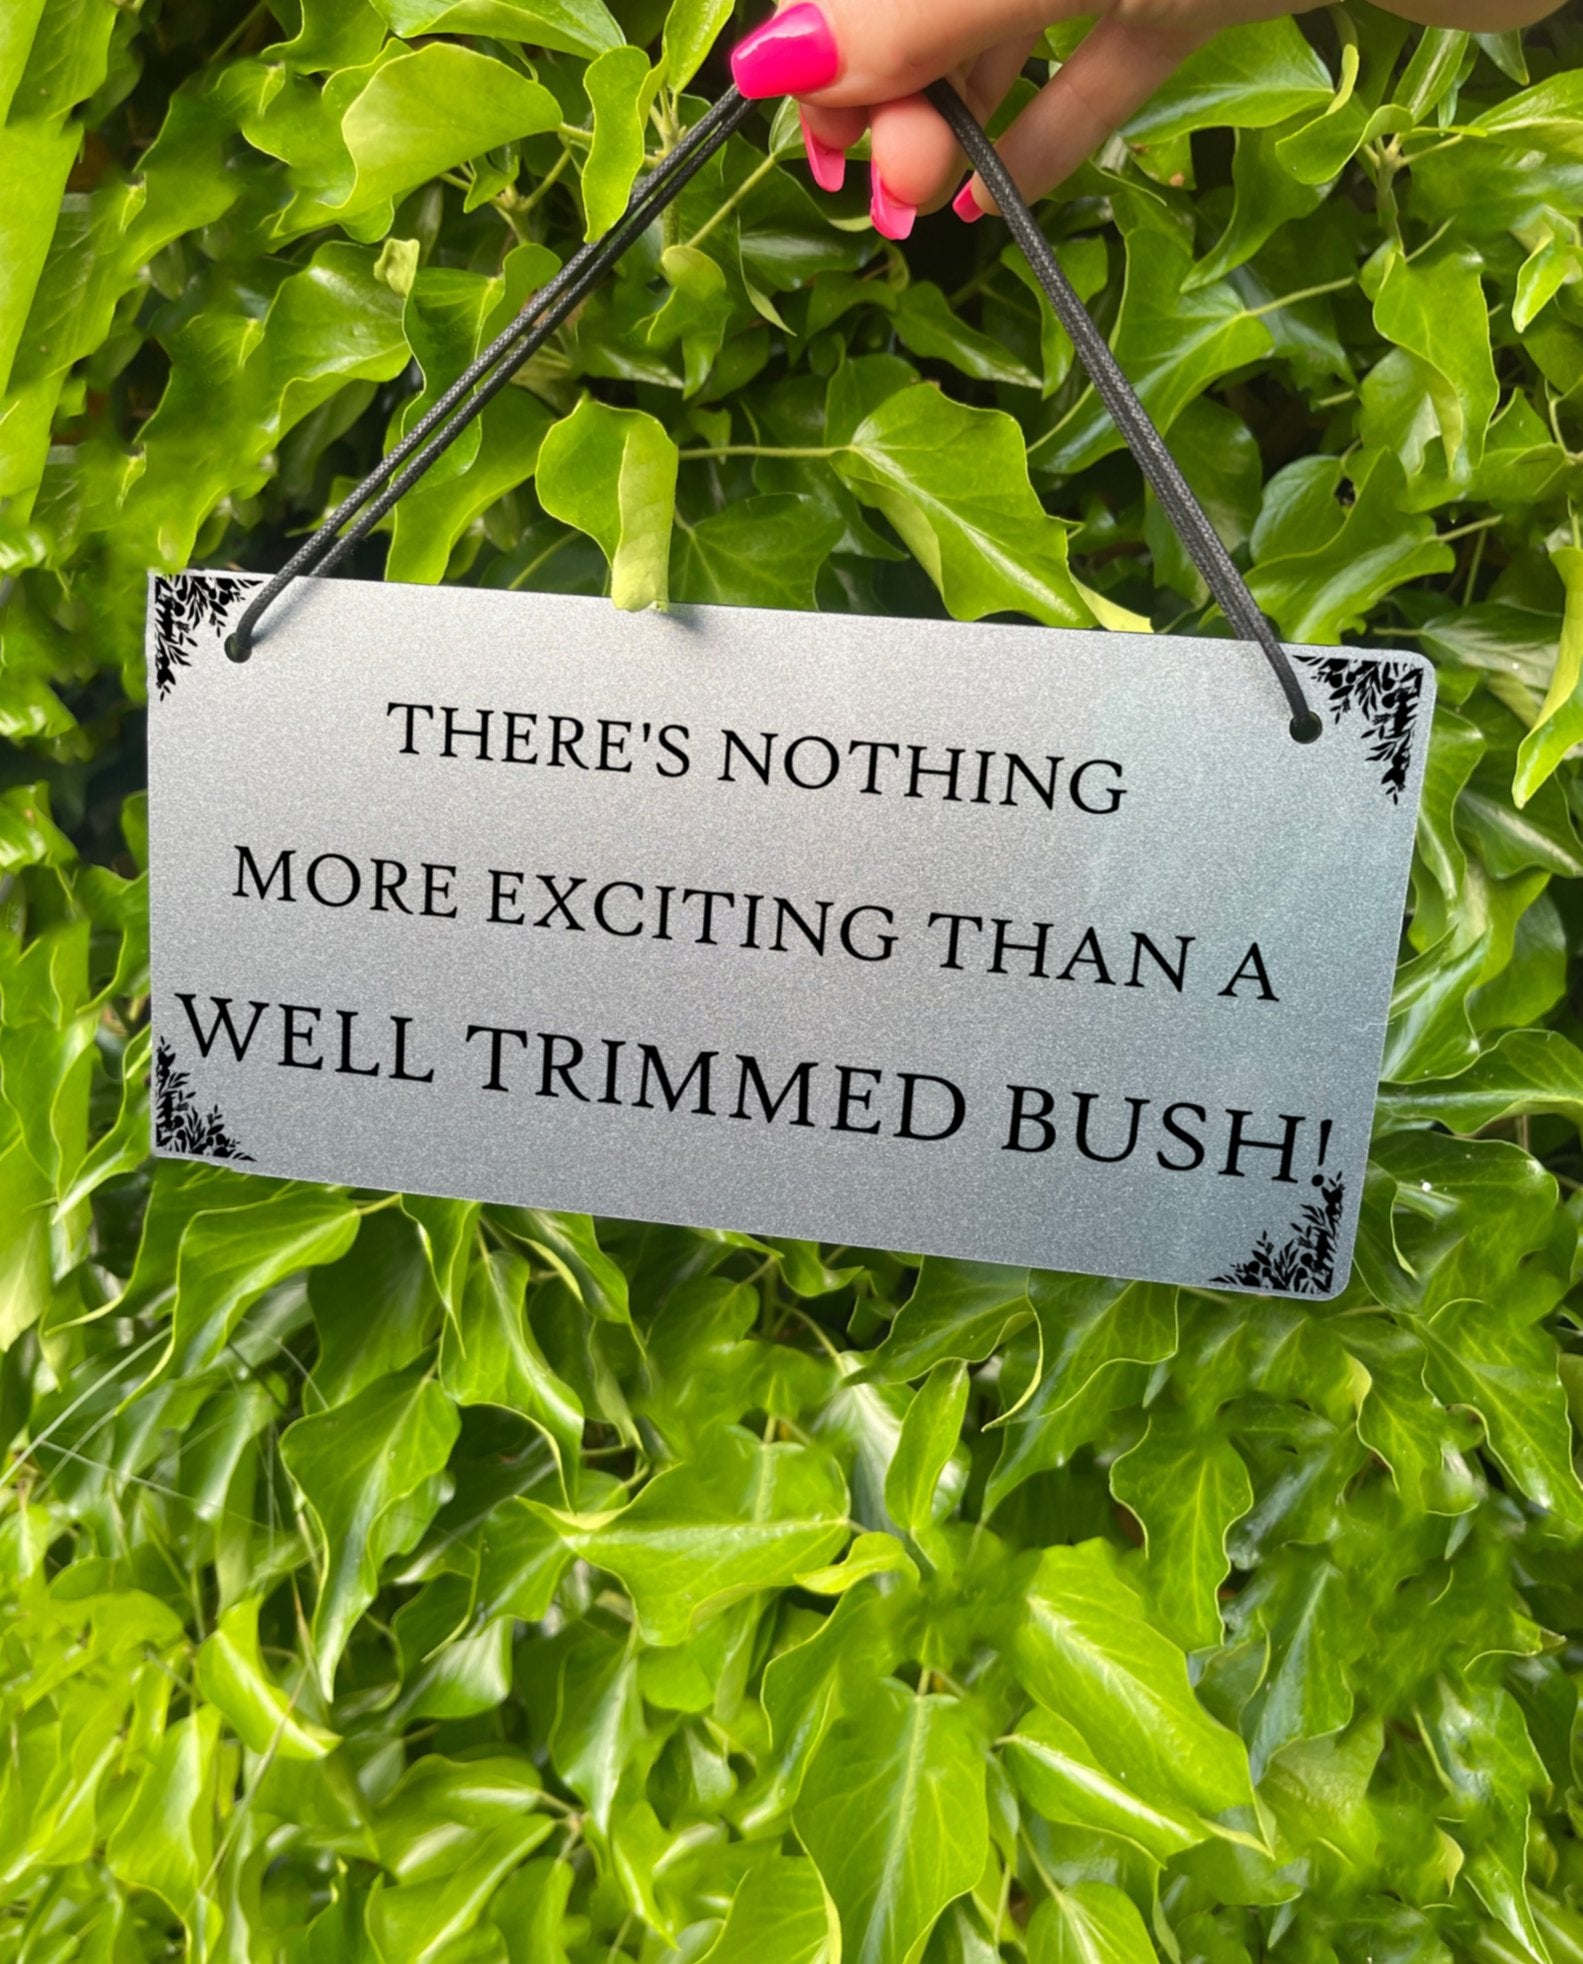 Image of "There's Nothing More Exciting Than A Well Trimmed Bush" sign: Alt Text: "A rectangular sign made of acrylic material with engraved text and a leaf design. The text is witty and humorous, adding charm to any space."